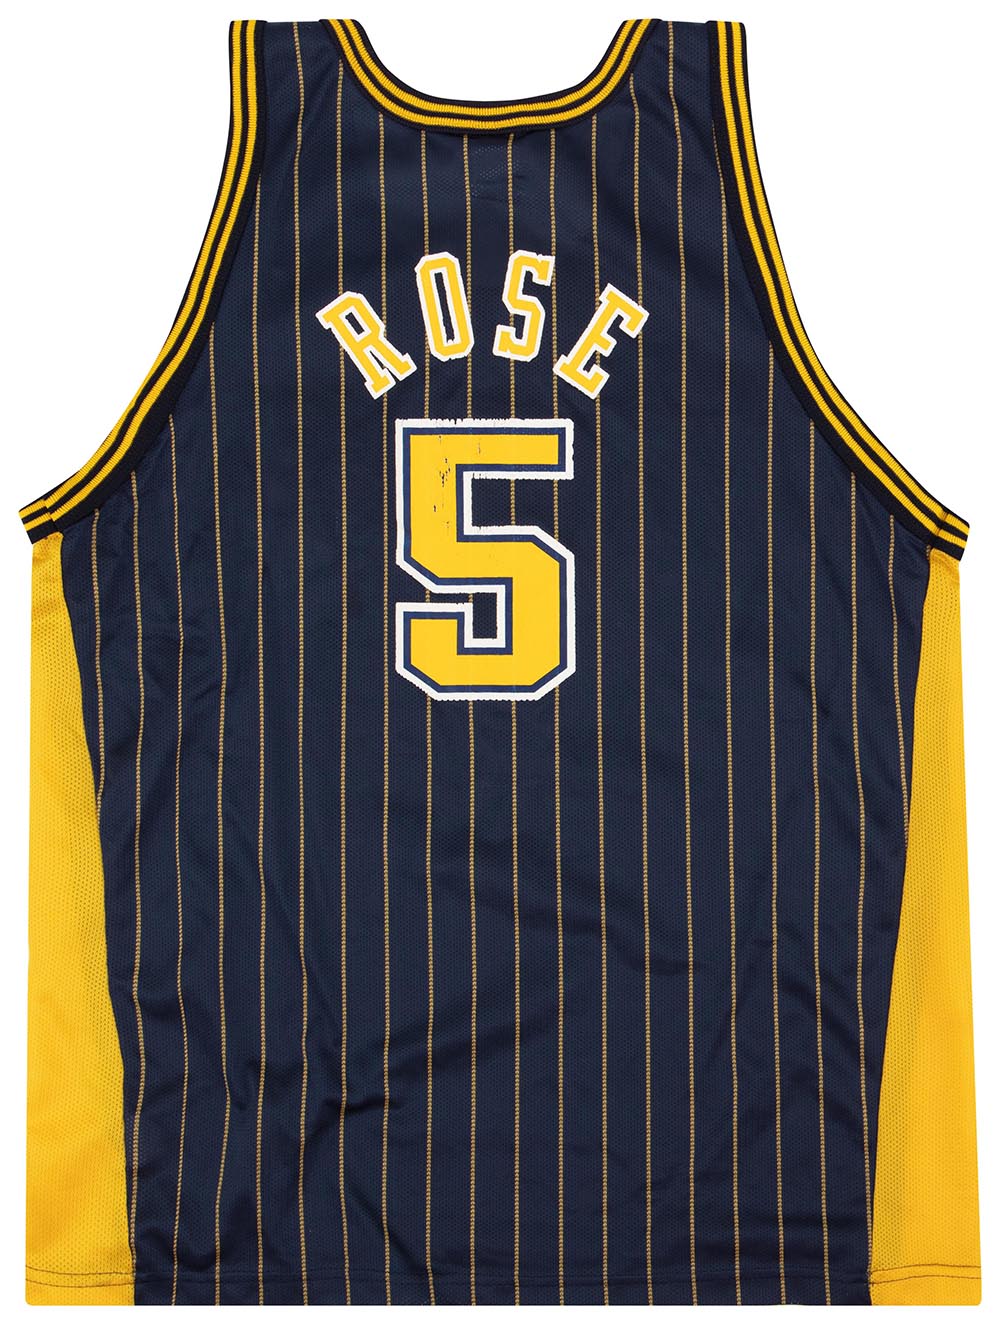 Indiana Pacers Throwback Jerseys, Vintage NBA Gear